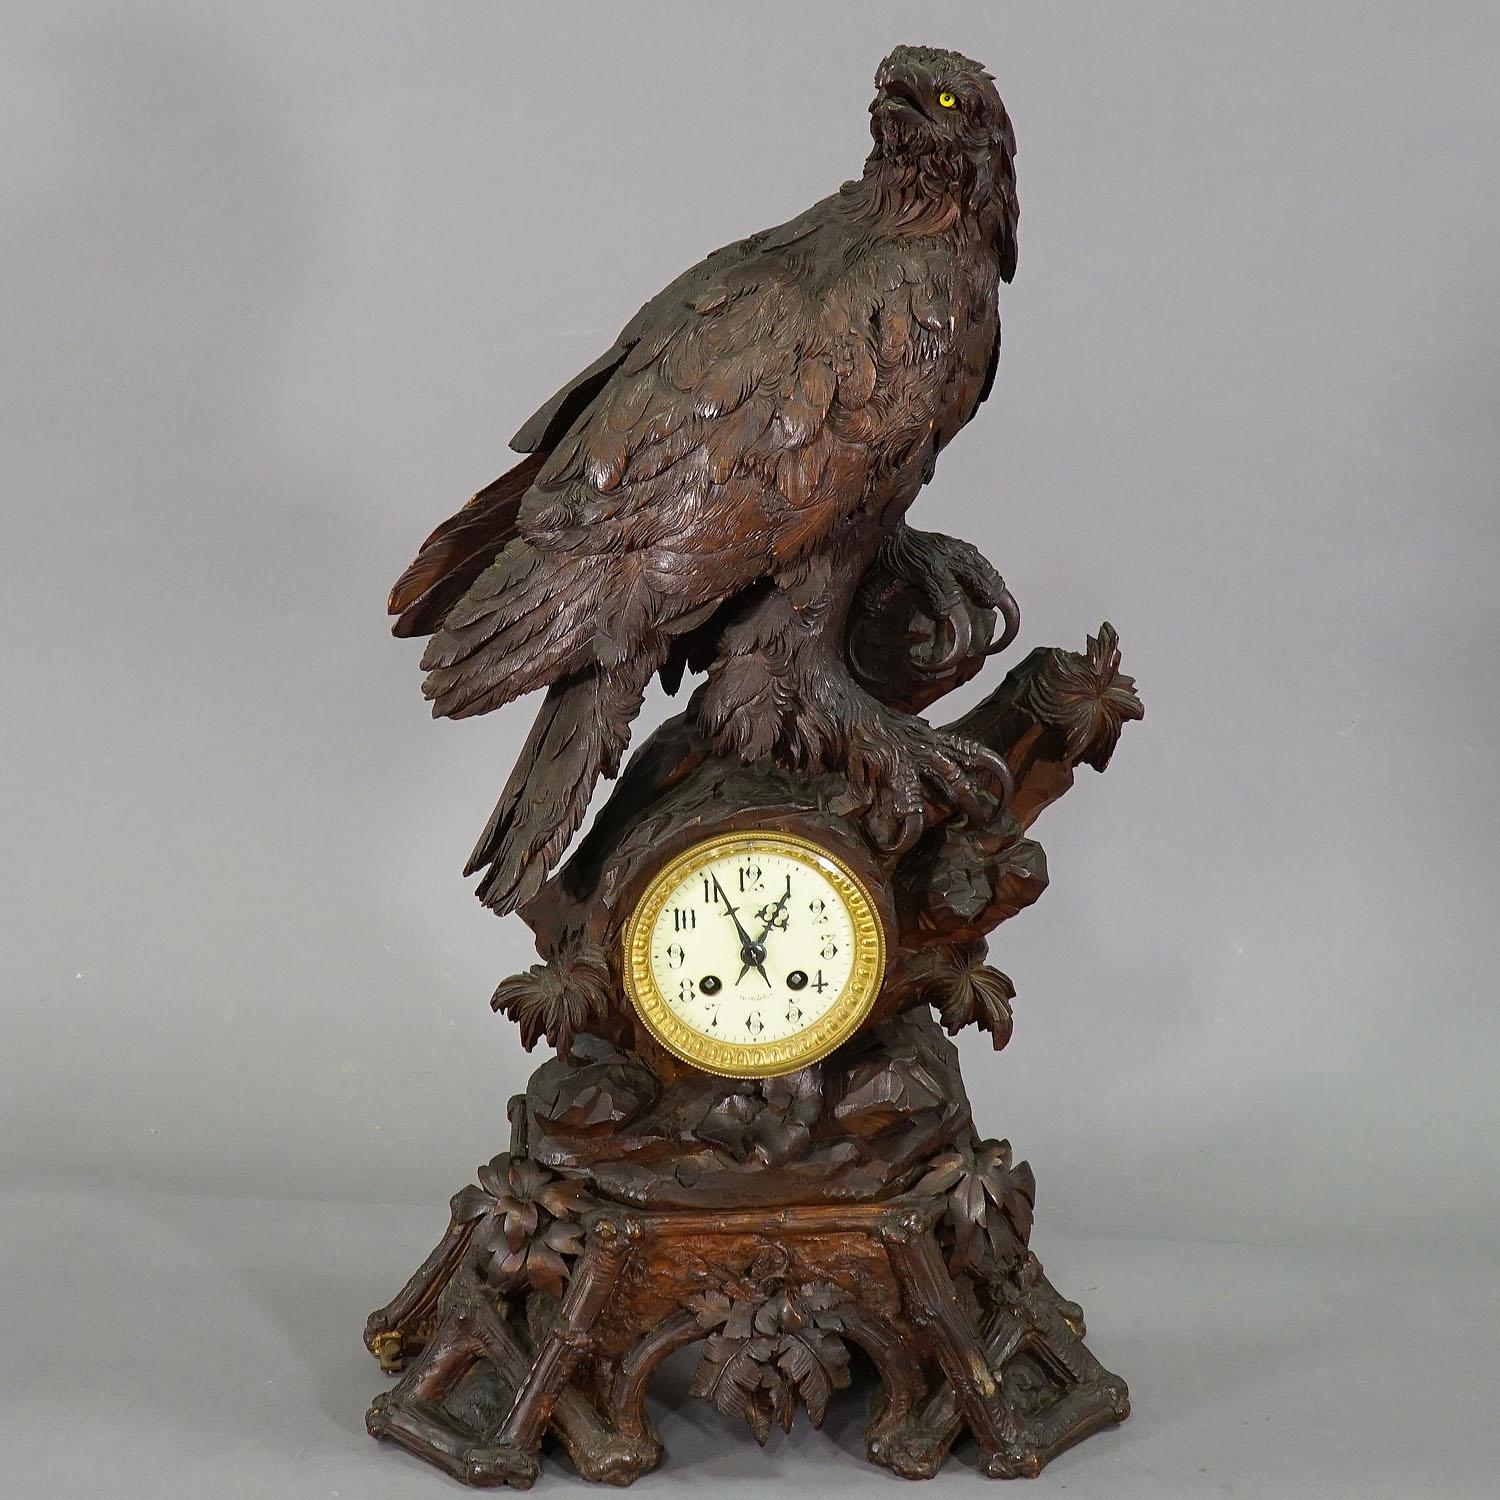 Antique Wooden Mantel Clock with Eagle, Swiss 1900

A great carved linden wood mantel clock with a very detailled carved eagle sitting on a rock with foliage decorations. The porcelaine clockface has handpainted numerals, handcarved in Switzerland -